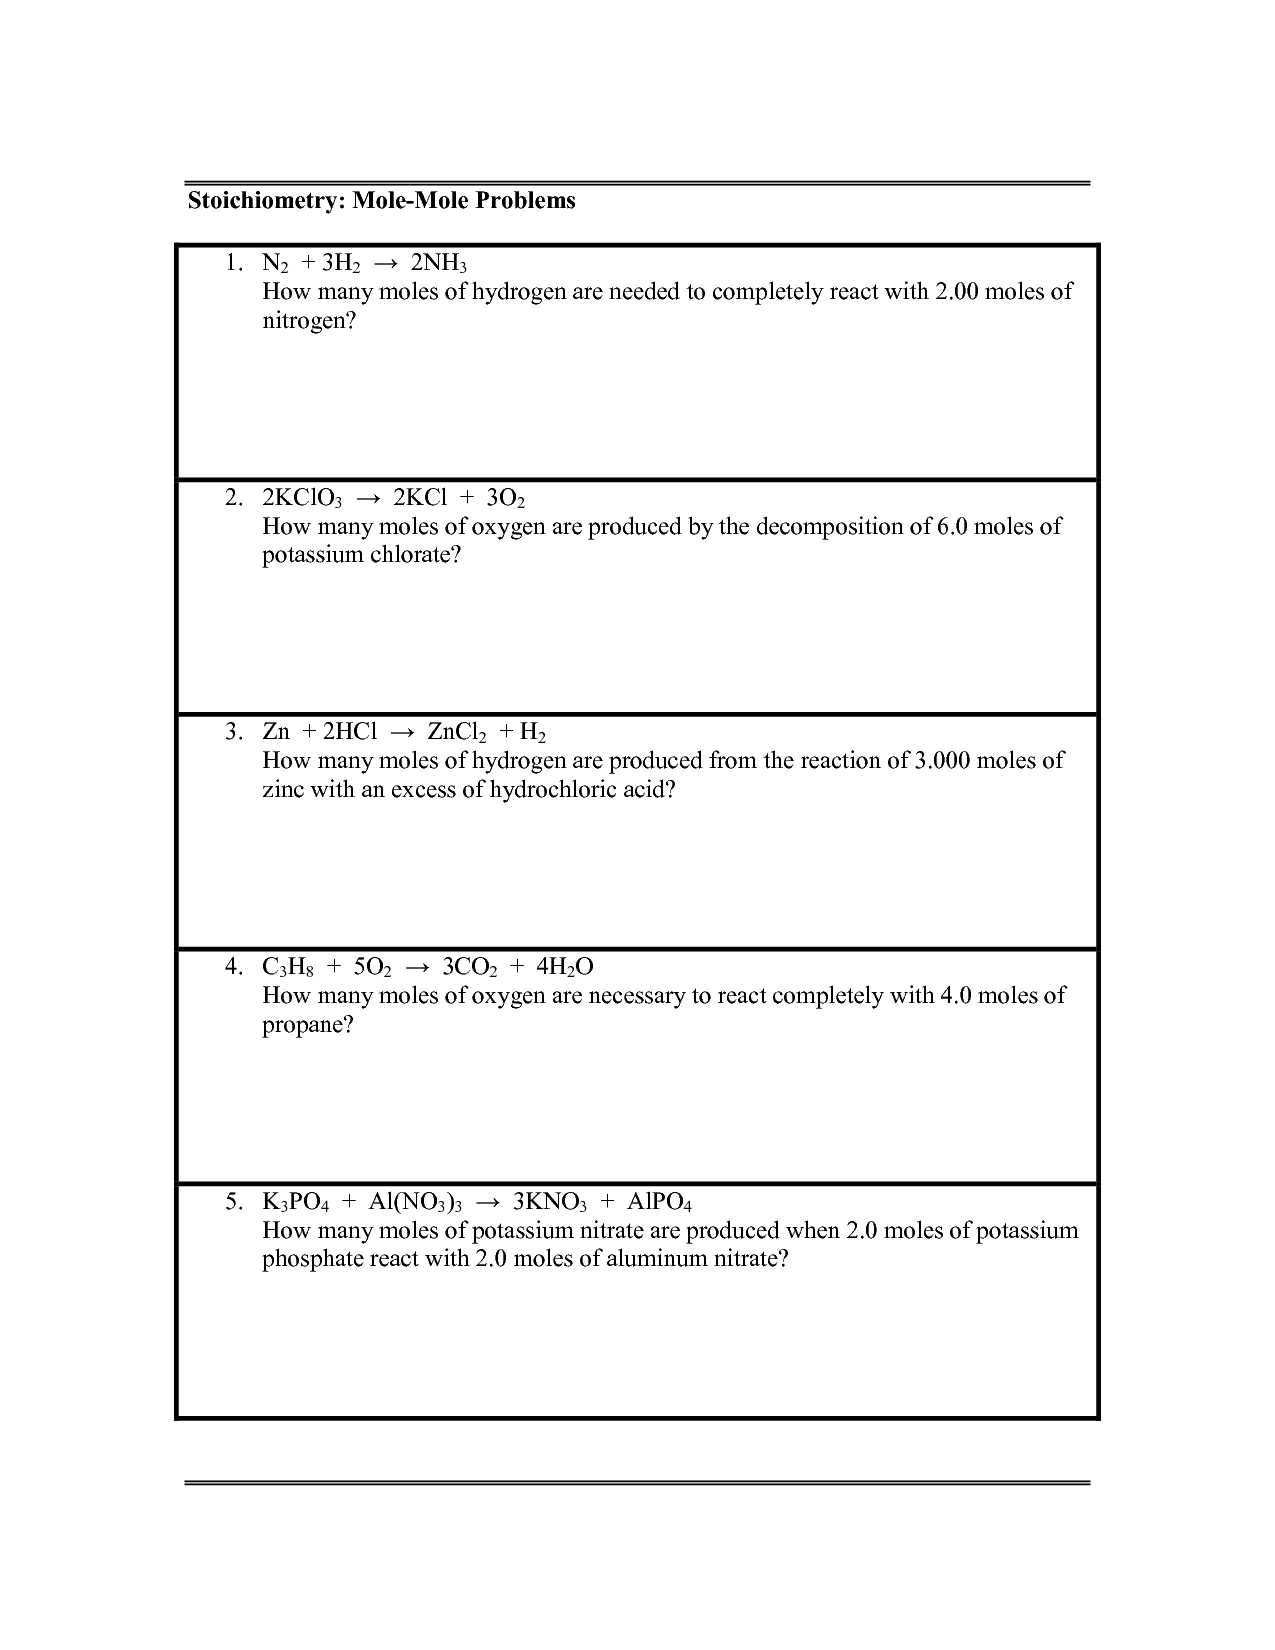 Mole Ratio Worksheet together with Stoichiometry Mole Mole Problems Worksheet Answers Image Collections